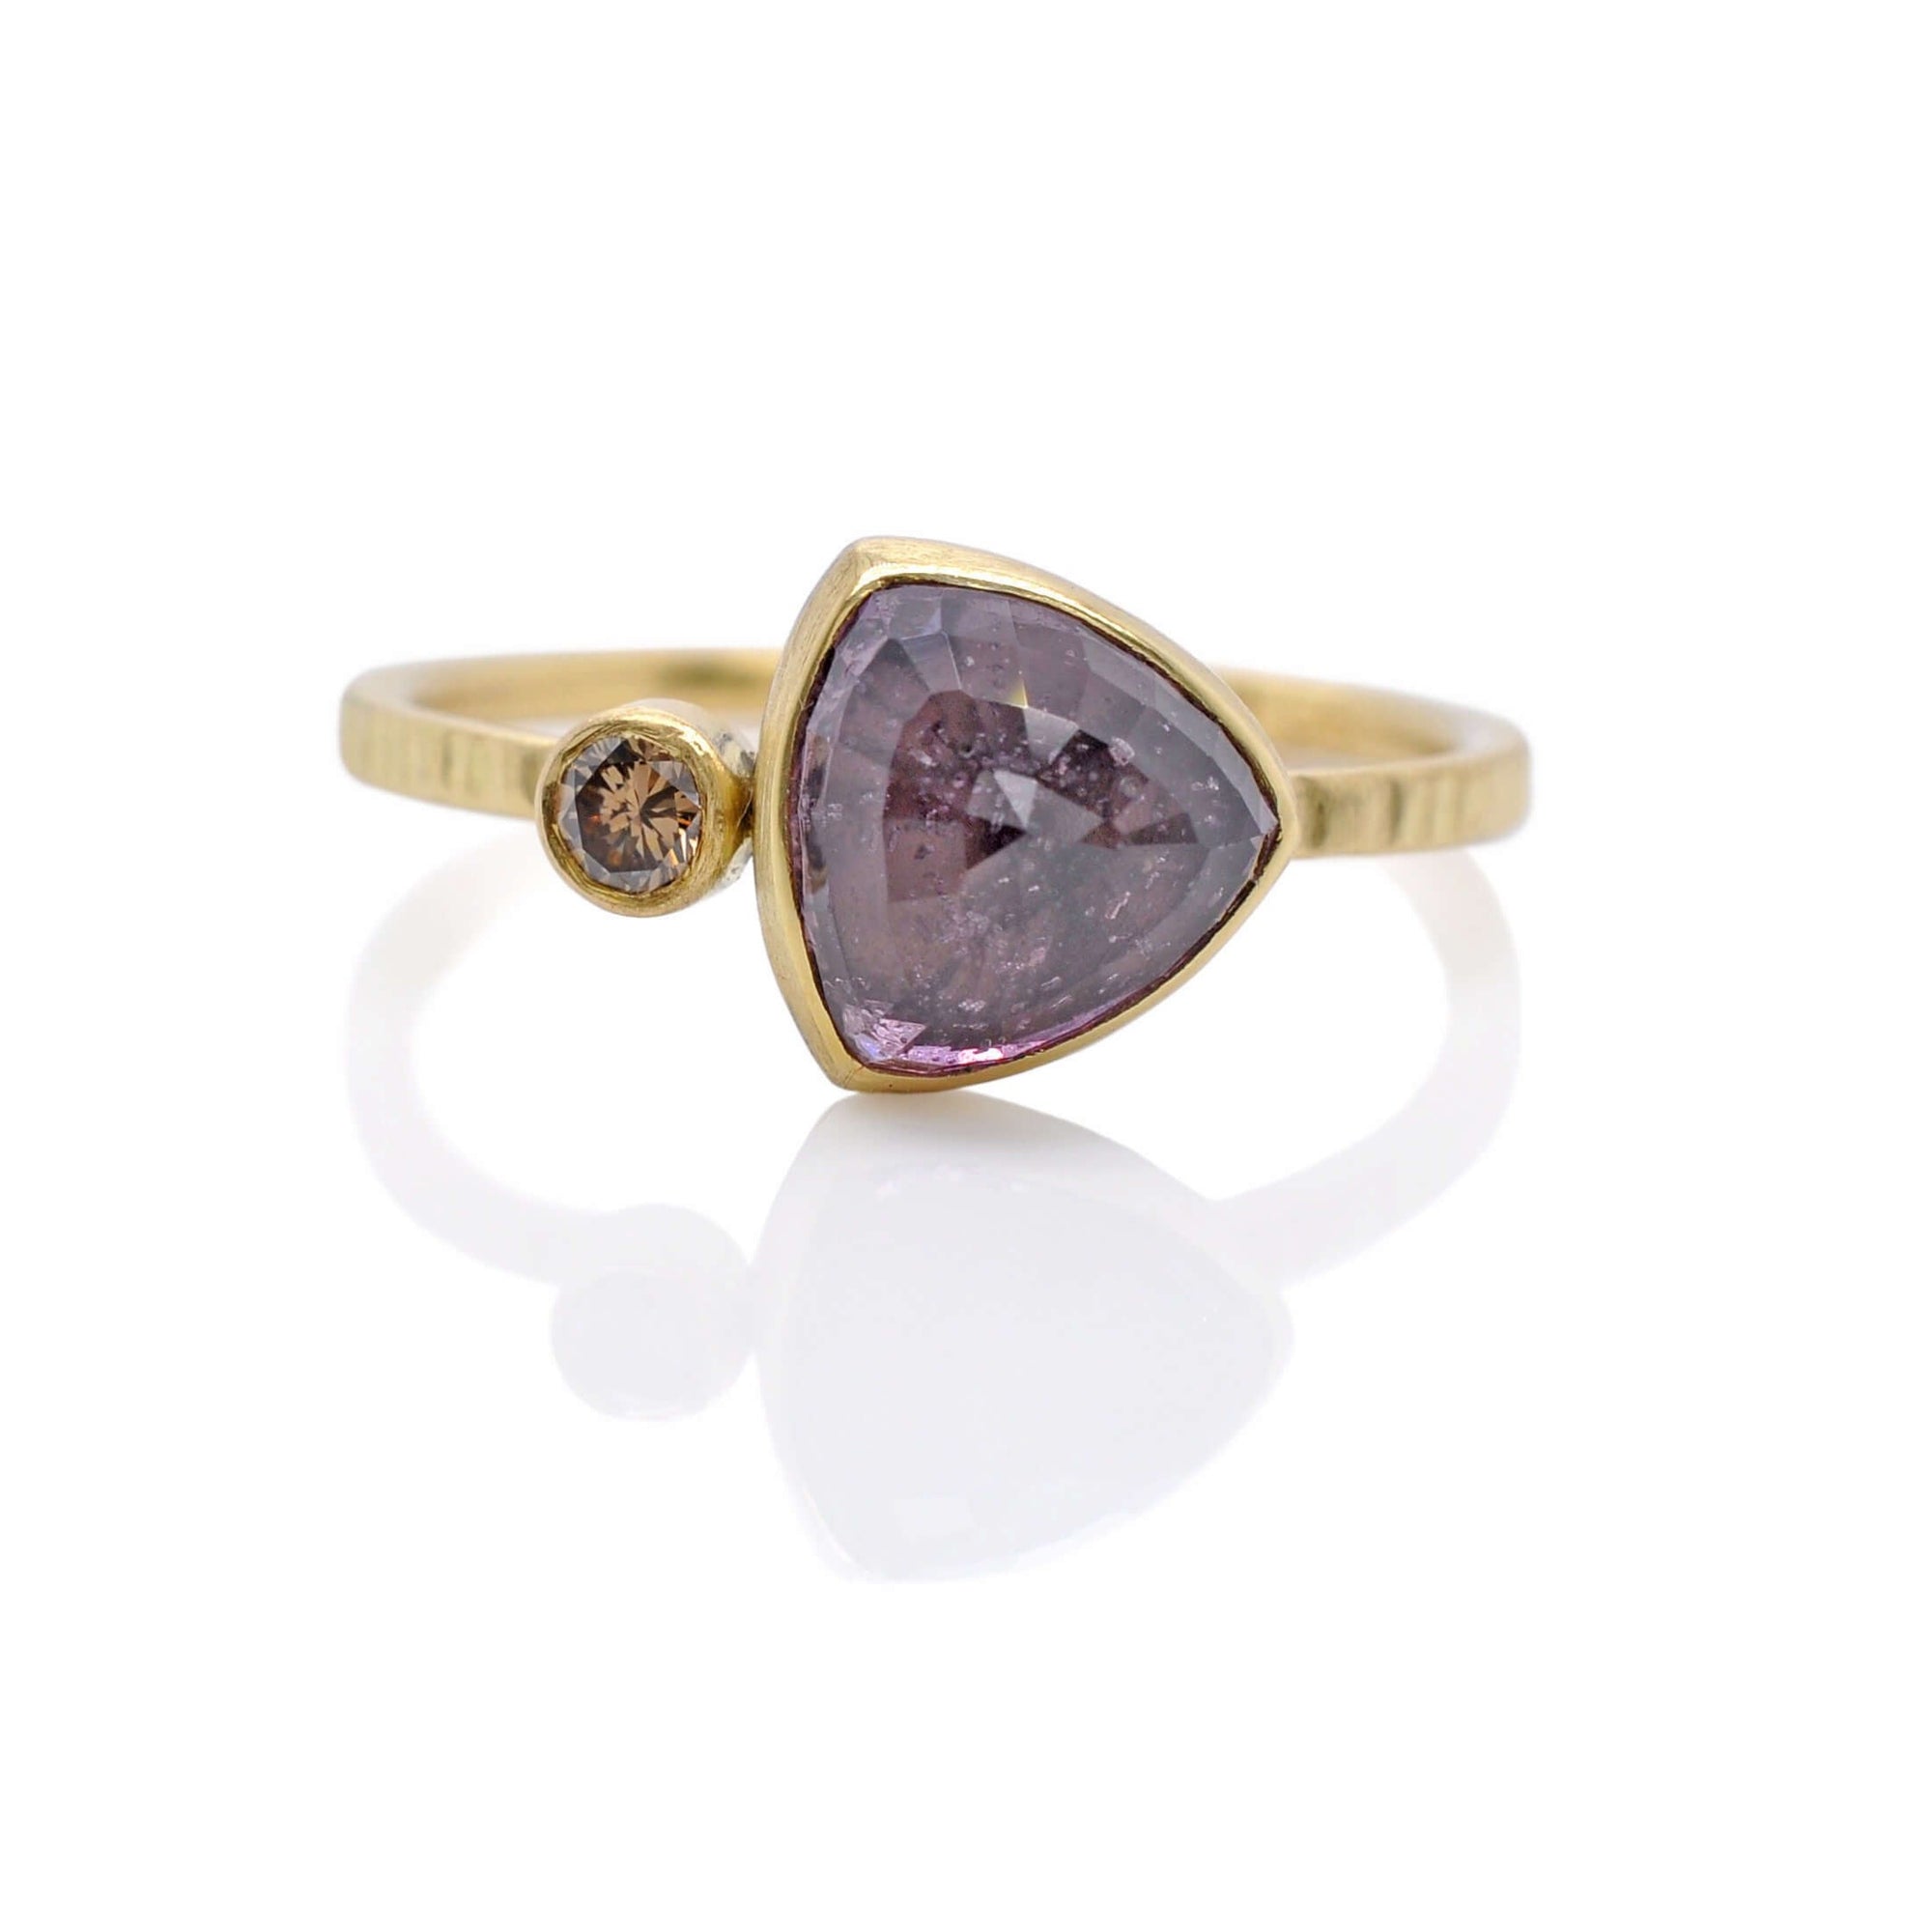 Trillion cut purple sapphire and champagne diamond duo ring in yellow gold. Handmade by EC Design Jewelry in Minneapolis, MN.